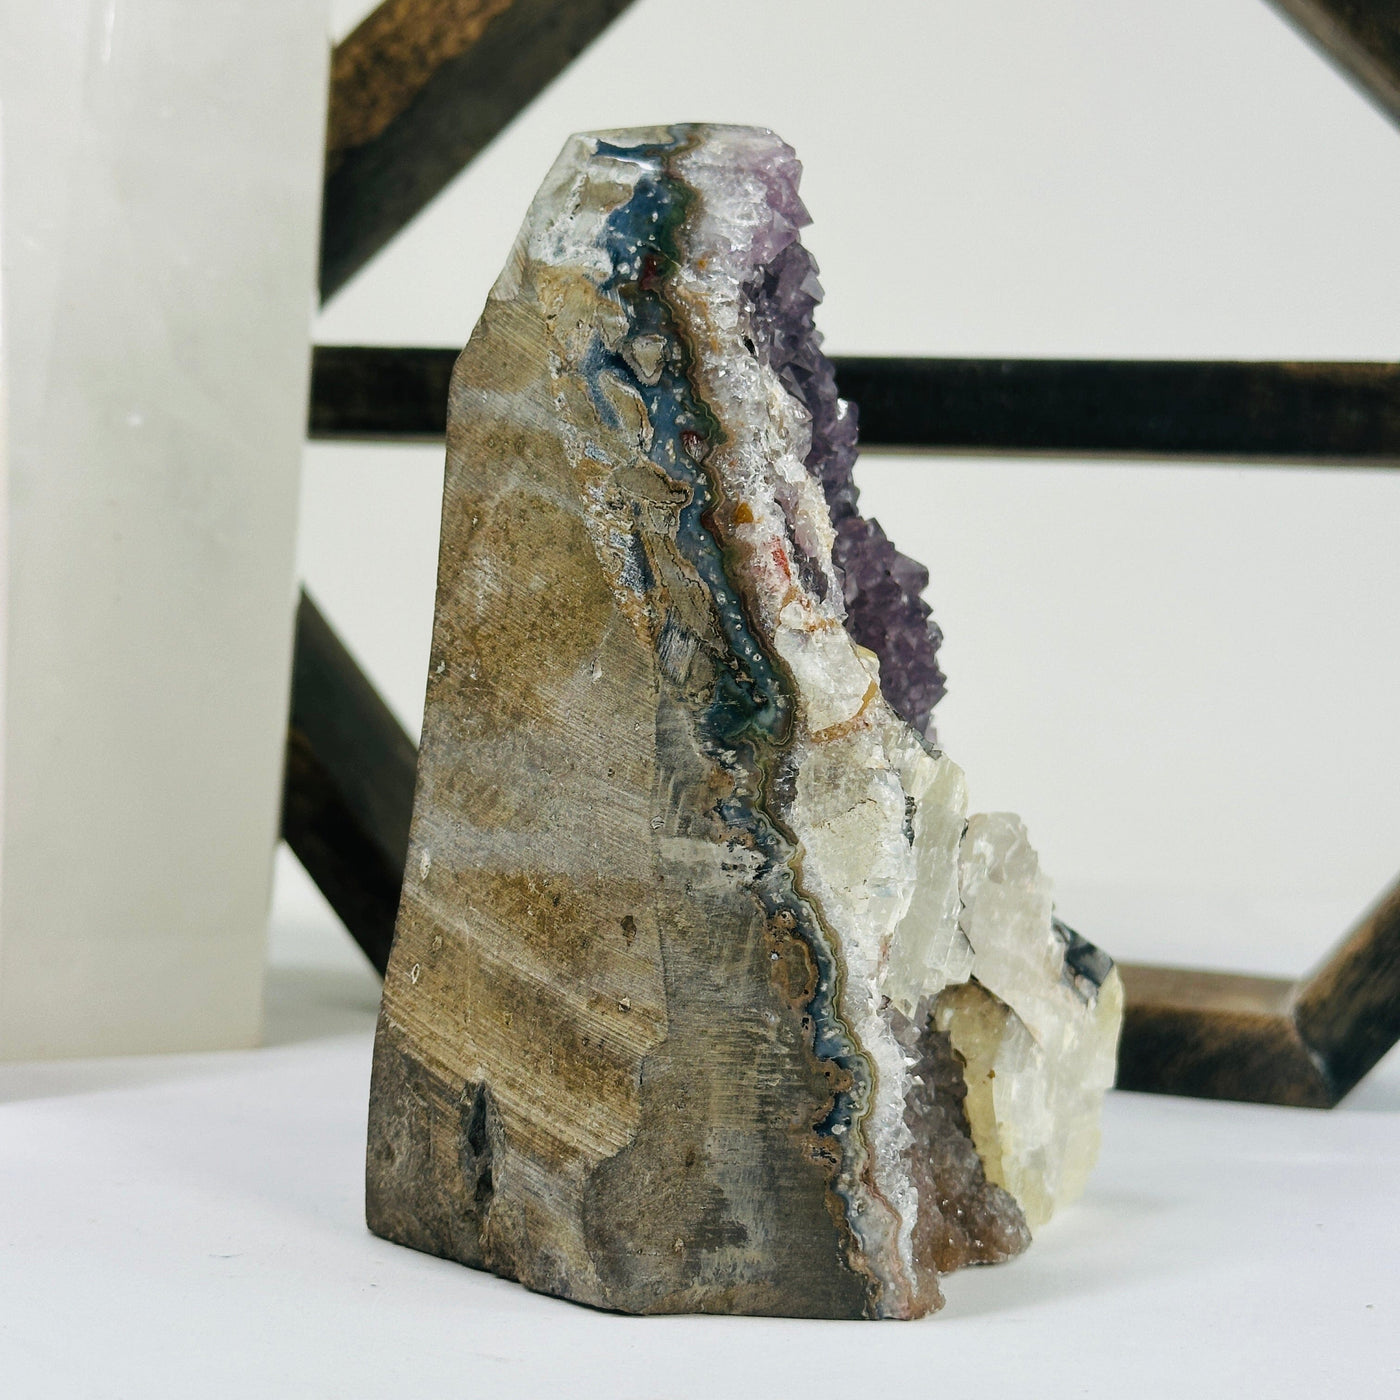 Amethyst cut base with decorations in the background